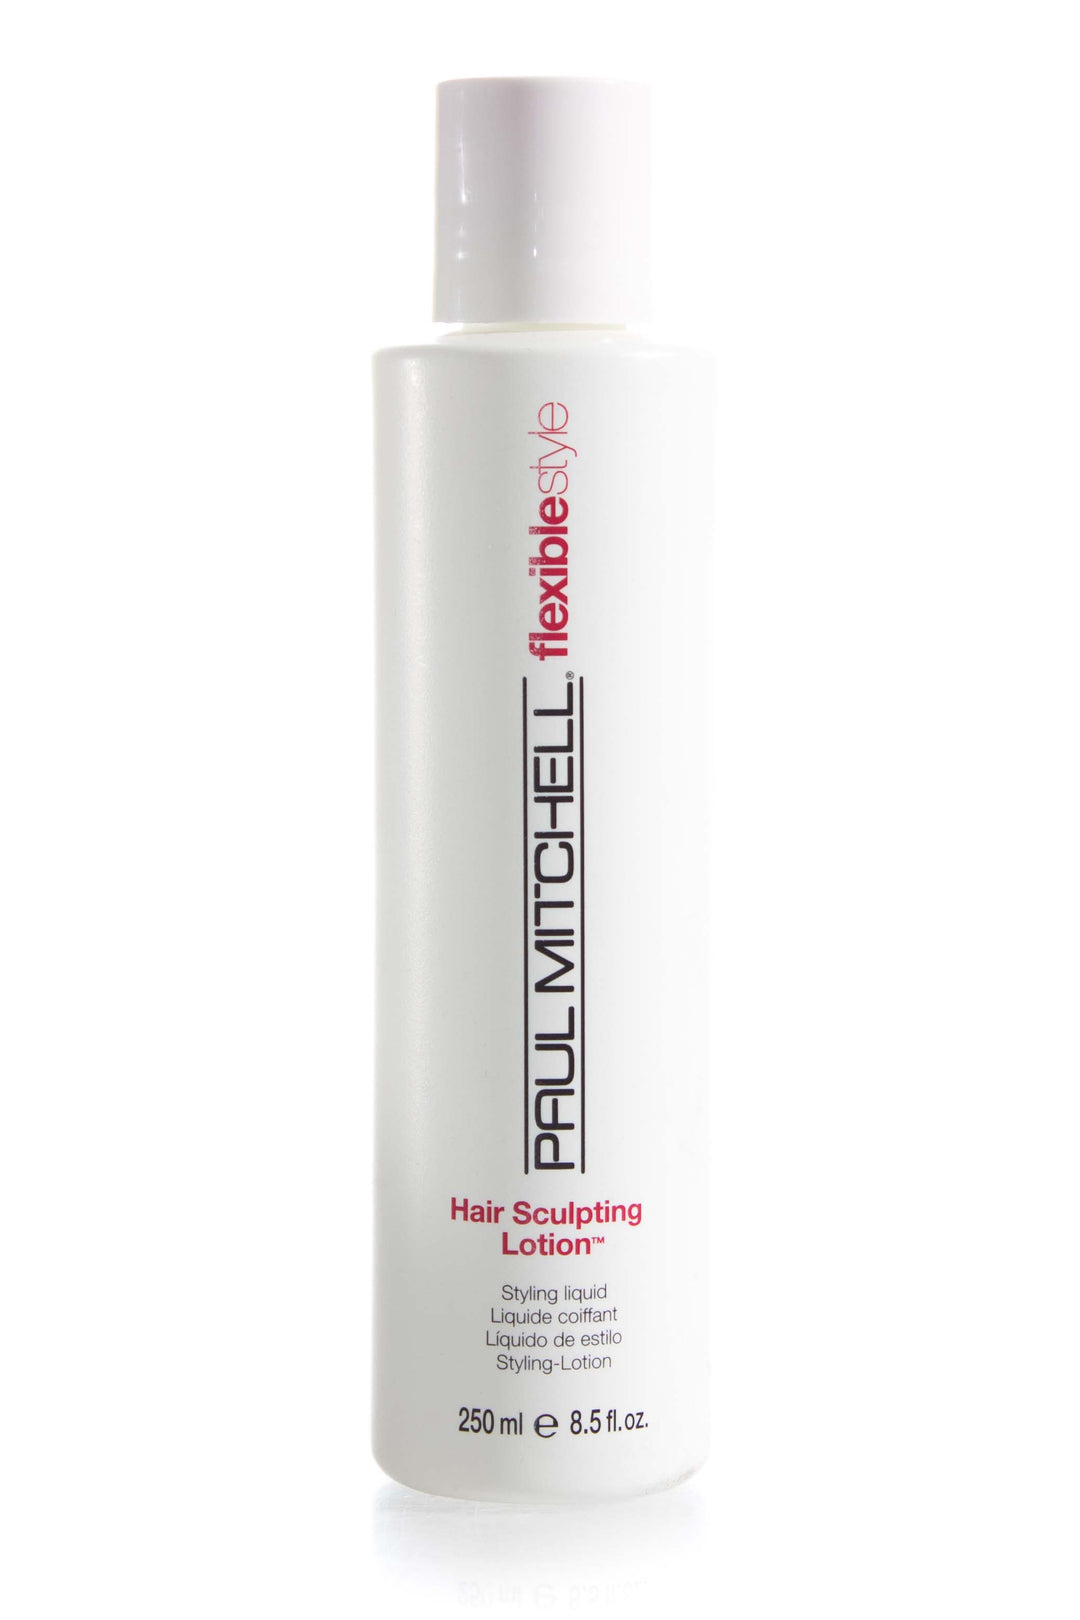 paul-mitchell-flexible-style-hair-sculpting-lotion-250ml